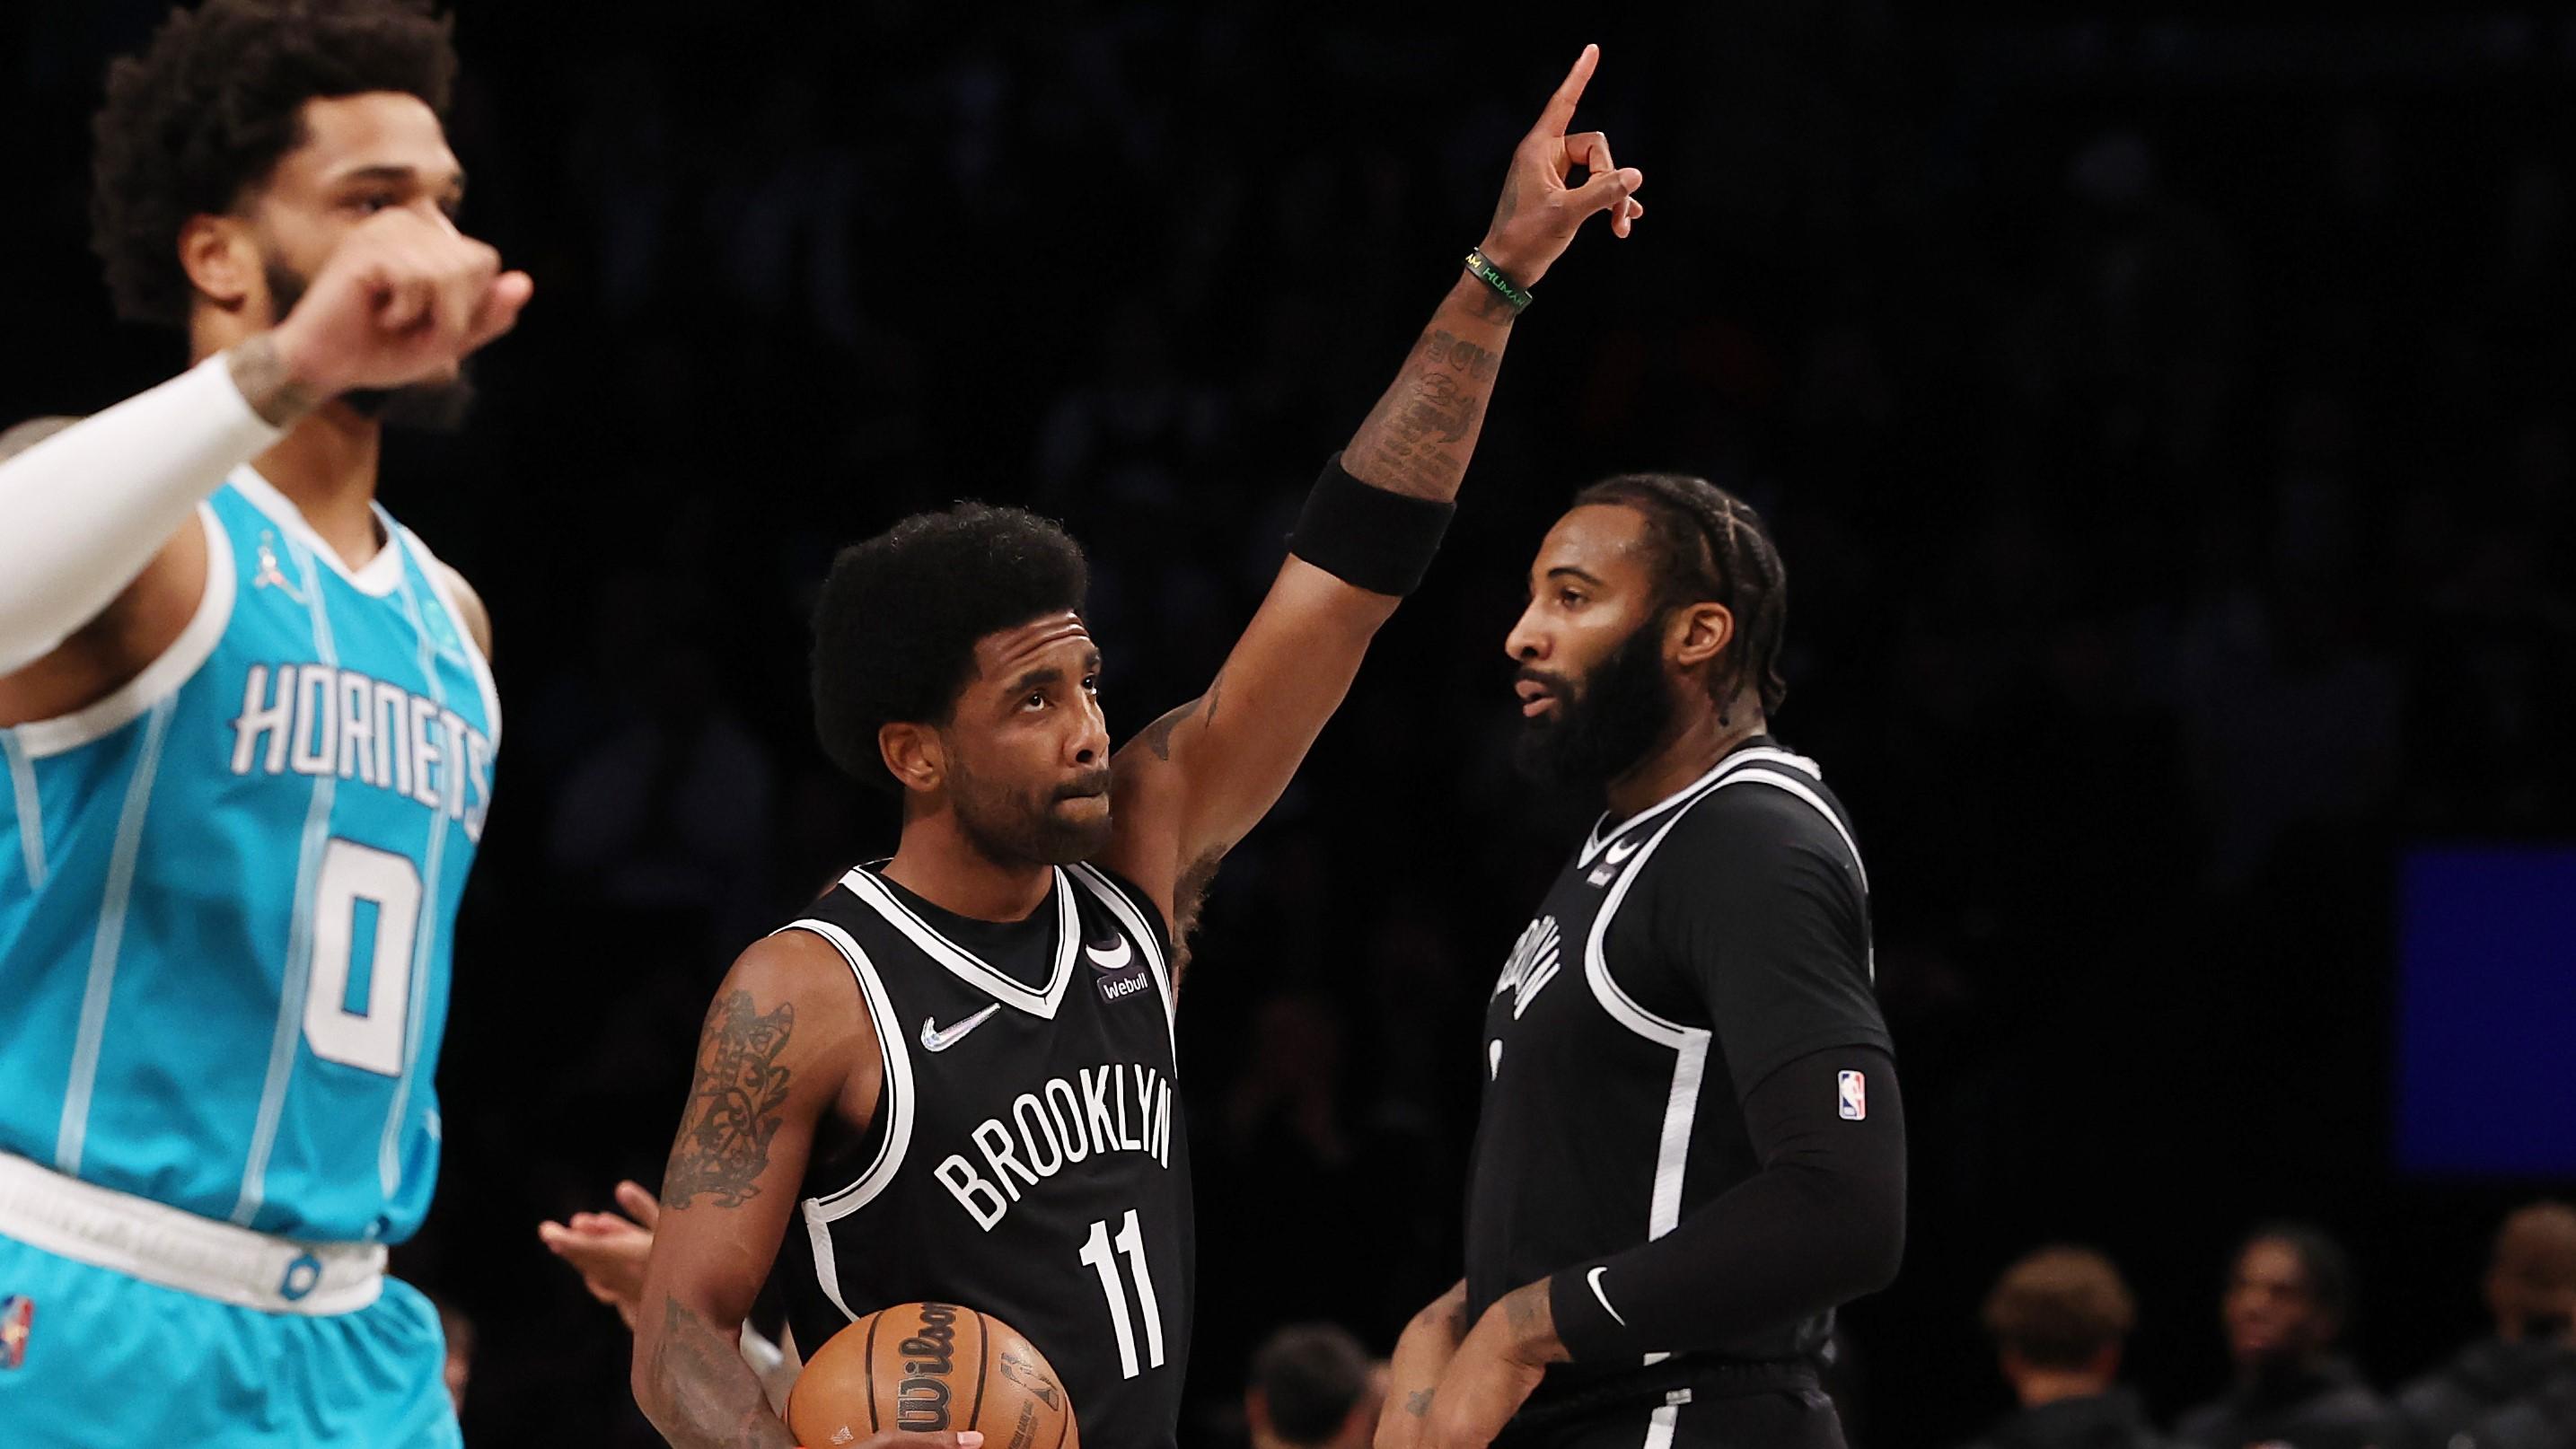 Mar 27, 2022; Brooklyn, New York, USA; Brooklyn Nets guard Kyrie Irving (11) gestures towards the fans before the game against the Charlotte Hornets at Barclays Center. Mandatory Credit: Vincent Carchietta-USA TODAY Sports / Vincent Carchietta-USA TODAY Sports